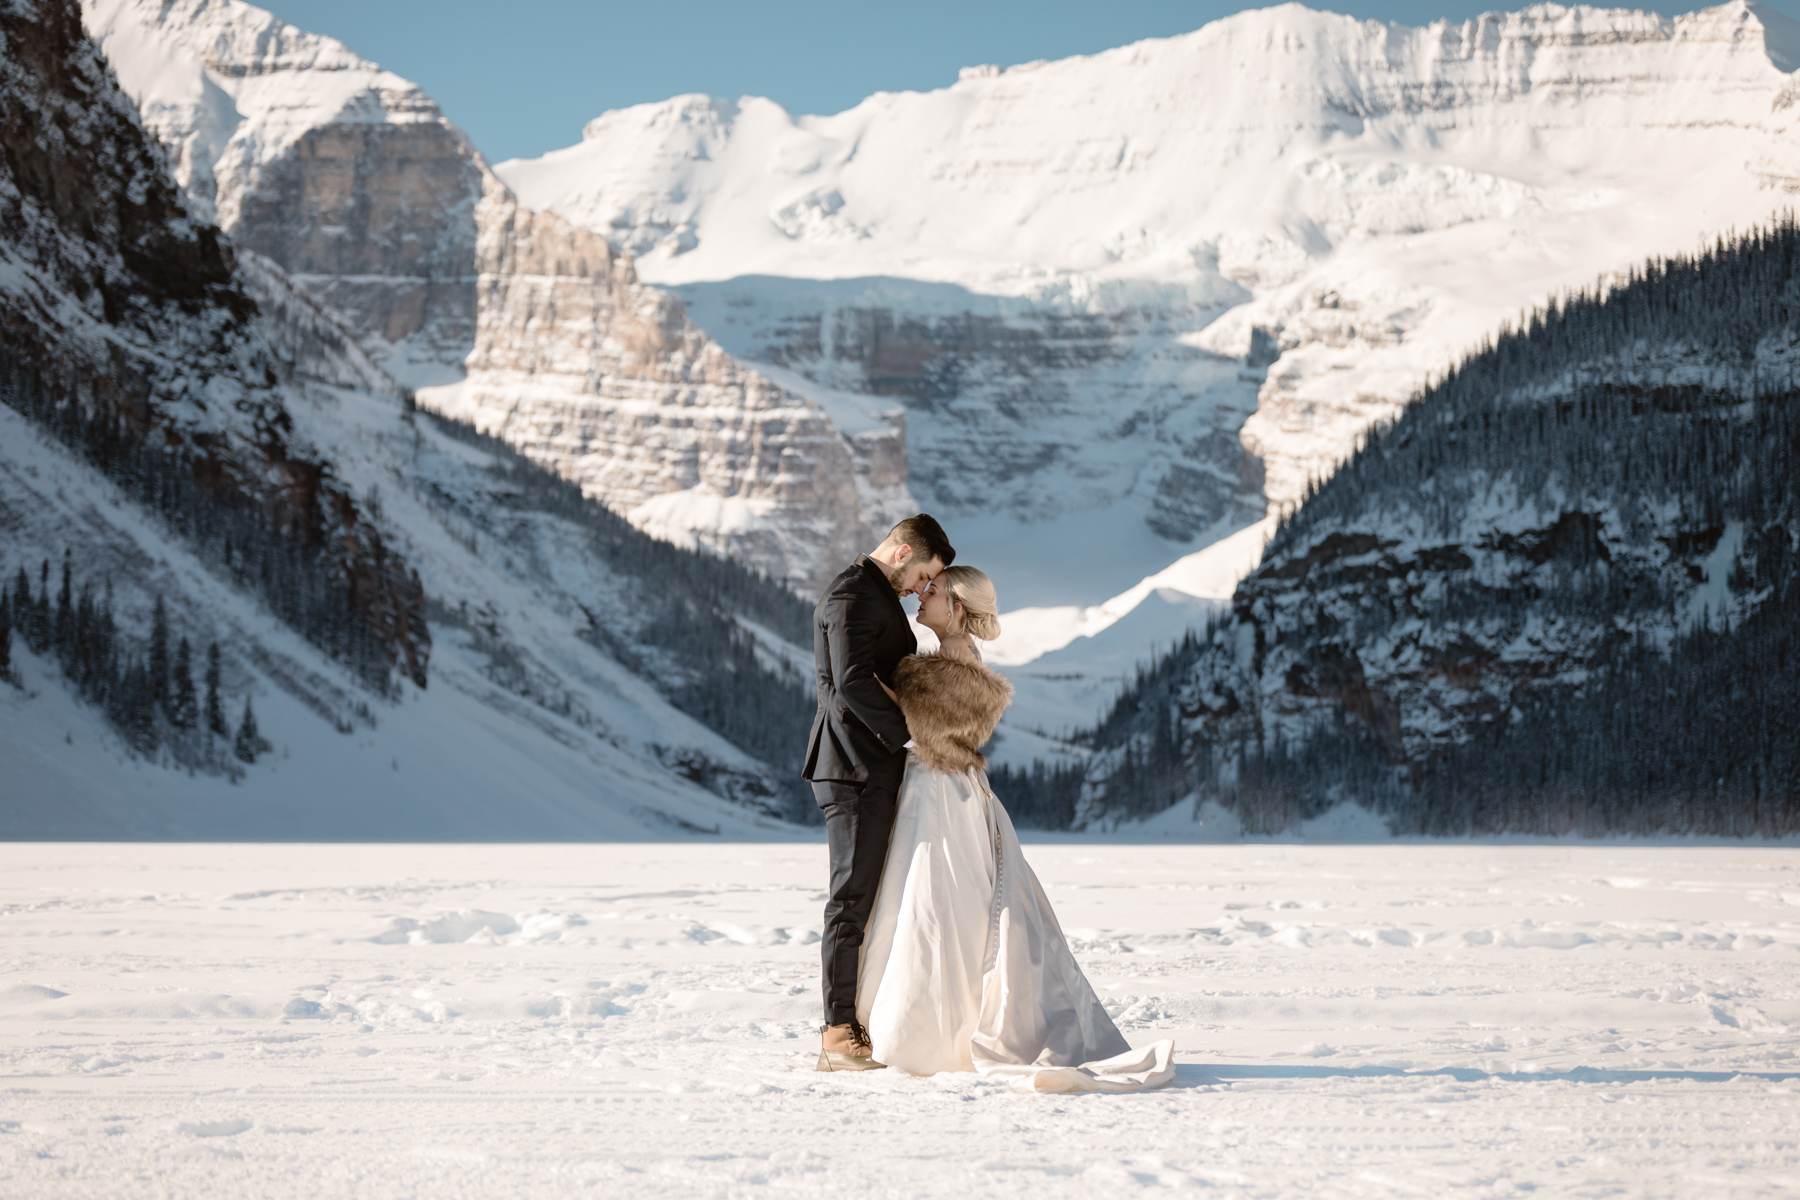 Fairmont Chateau Lake Louise Wedding Photography in Winter - Image 24